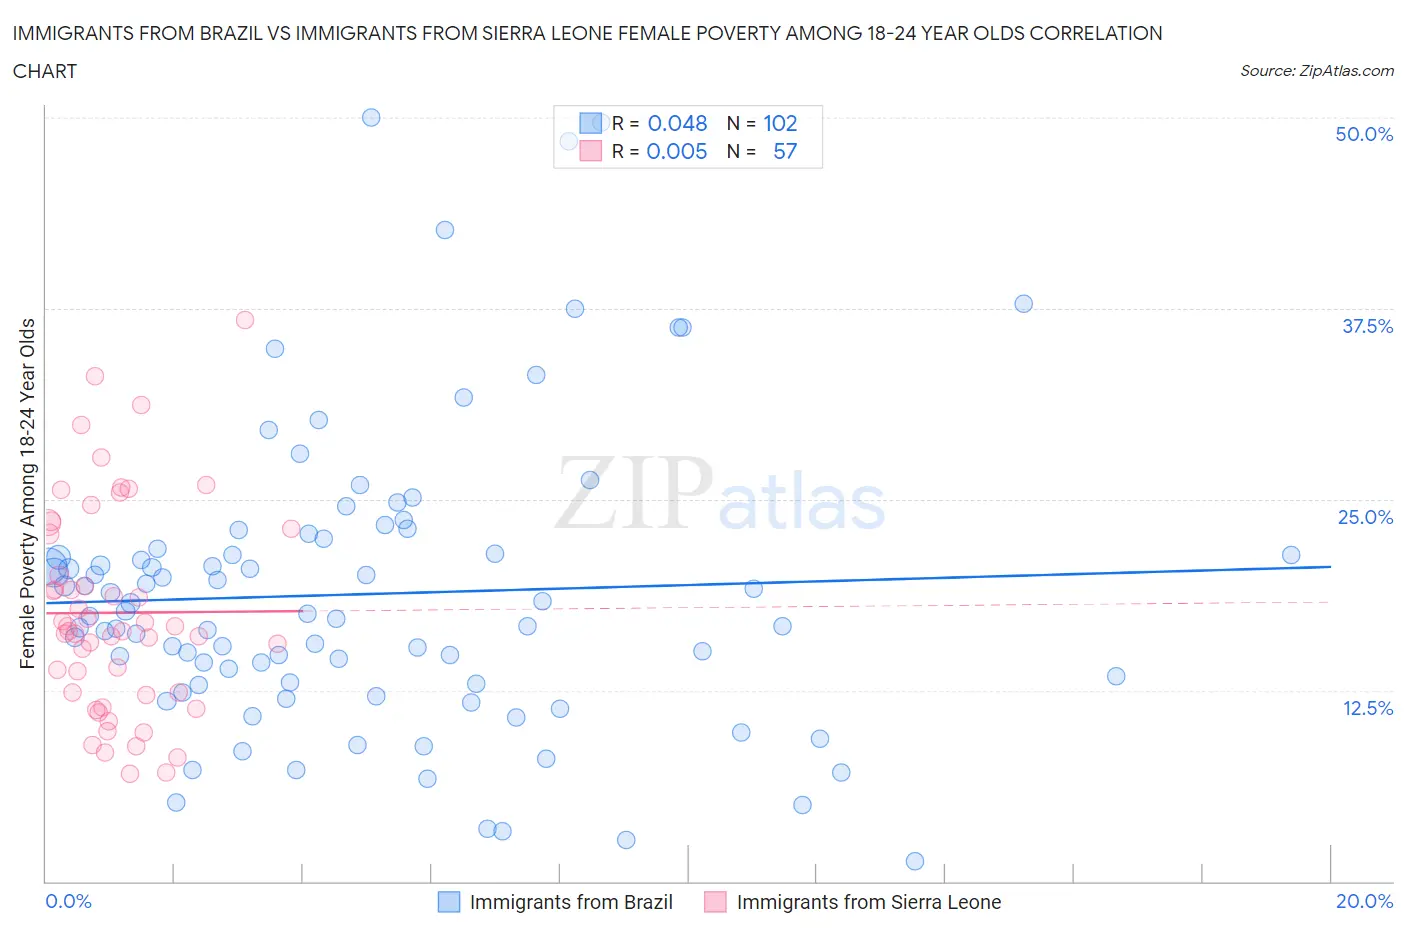 Immigrants from Brazil vs Immigrants from Sierra Leone Female Poverty Among 18-24 Year Olds